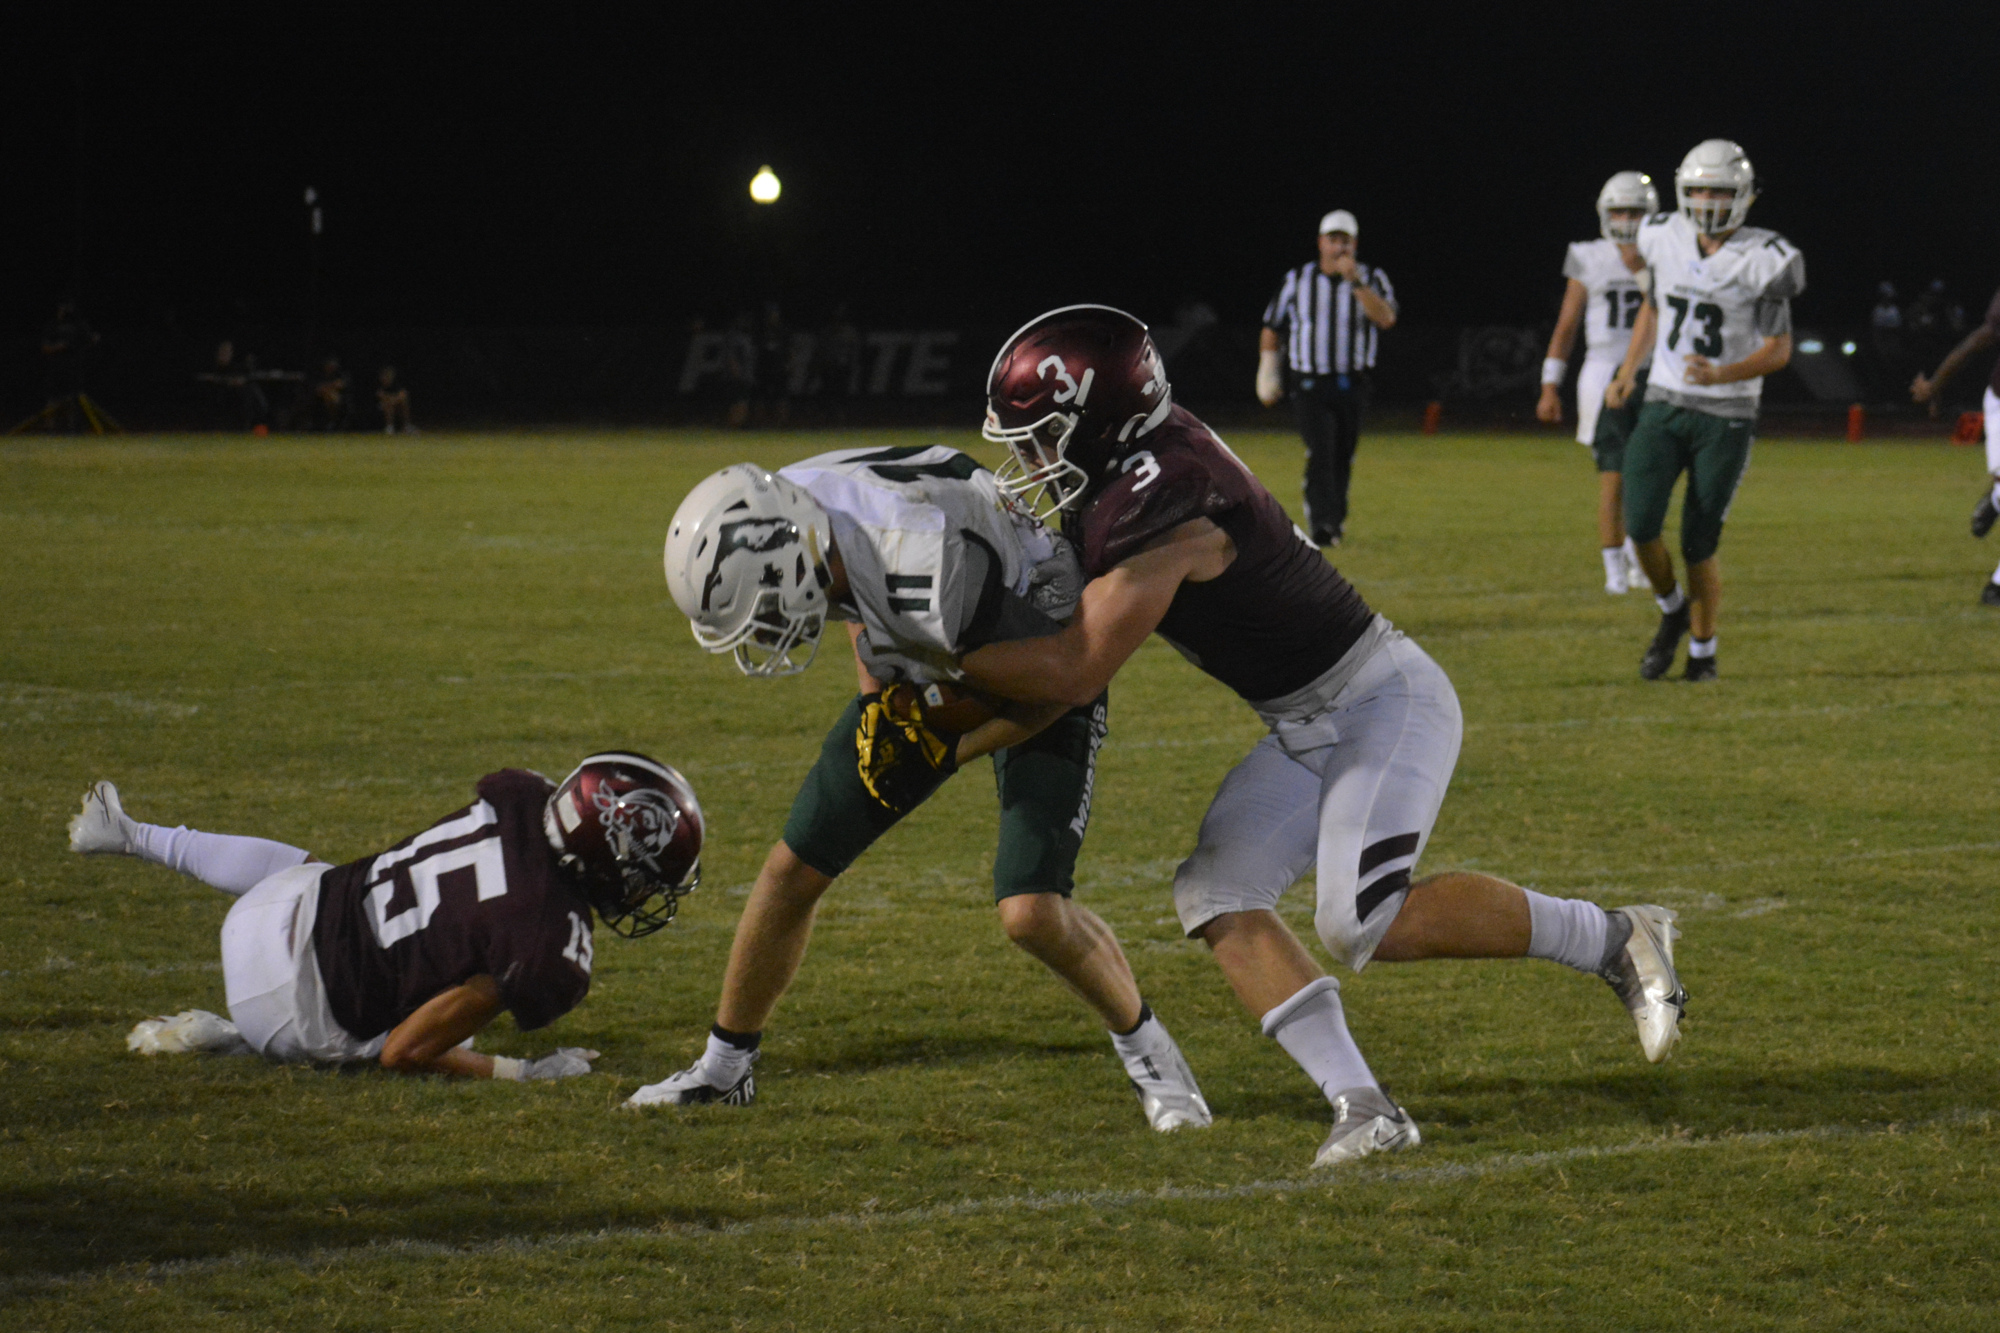 Braden River linebacker Aidan Dangler (right) puts a hit on Lakewood Ranch wide receiver Isaac Ashley during the teams' 2021 rivalry game. Dangler led the Pirates with 123 tackles last season. (File photo)